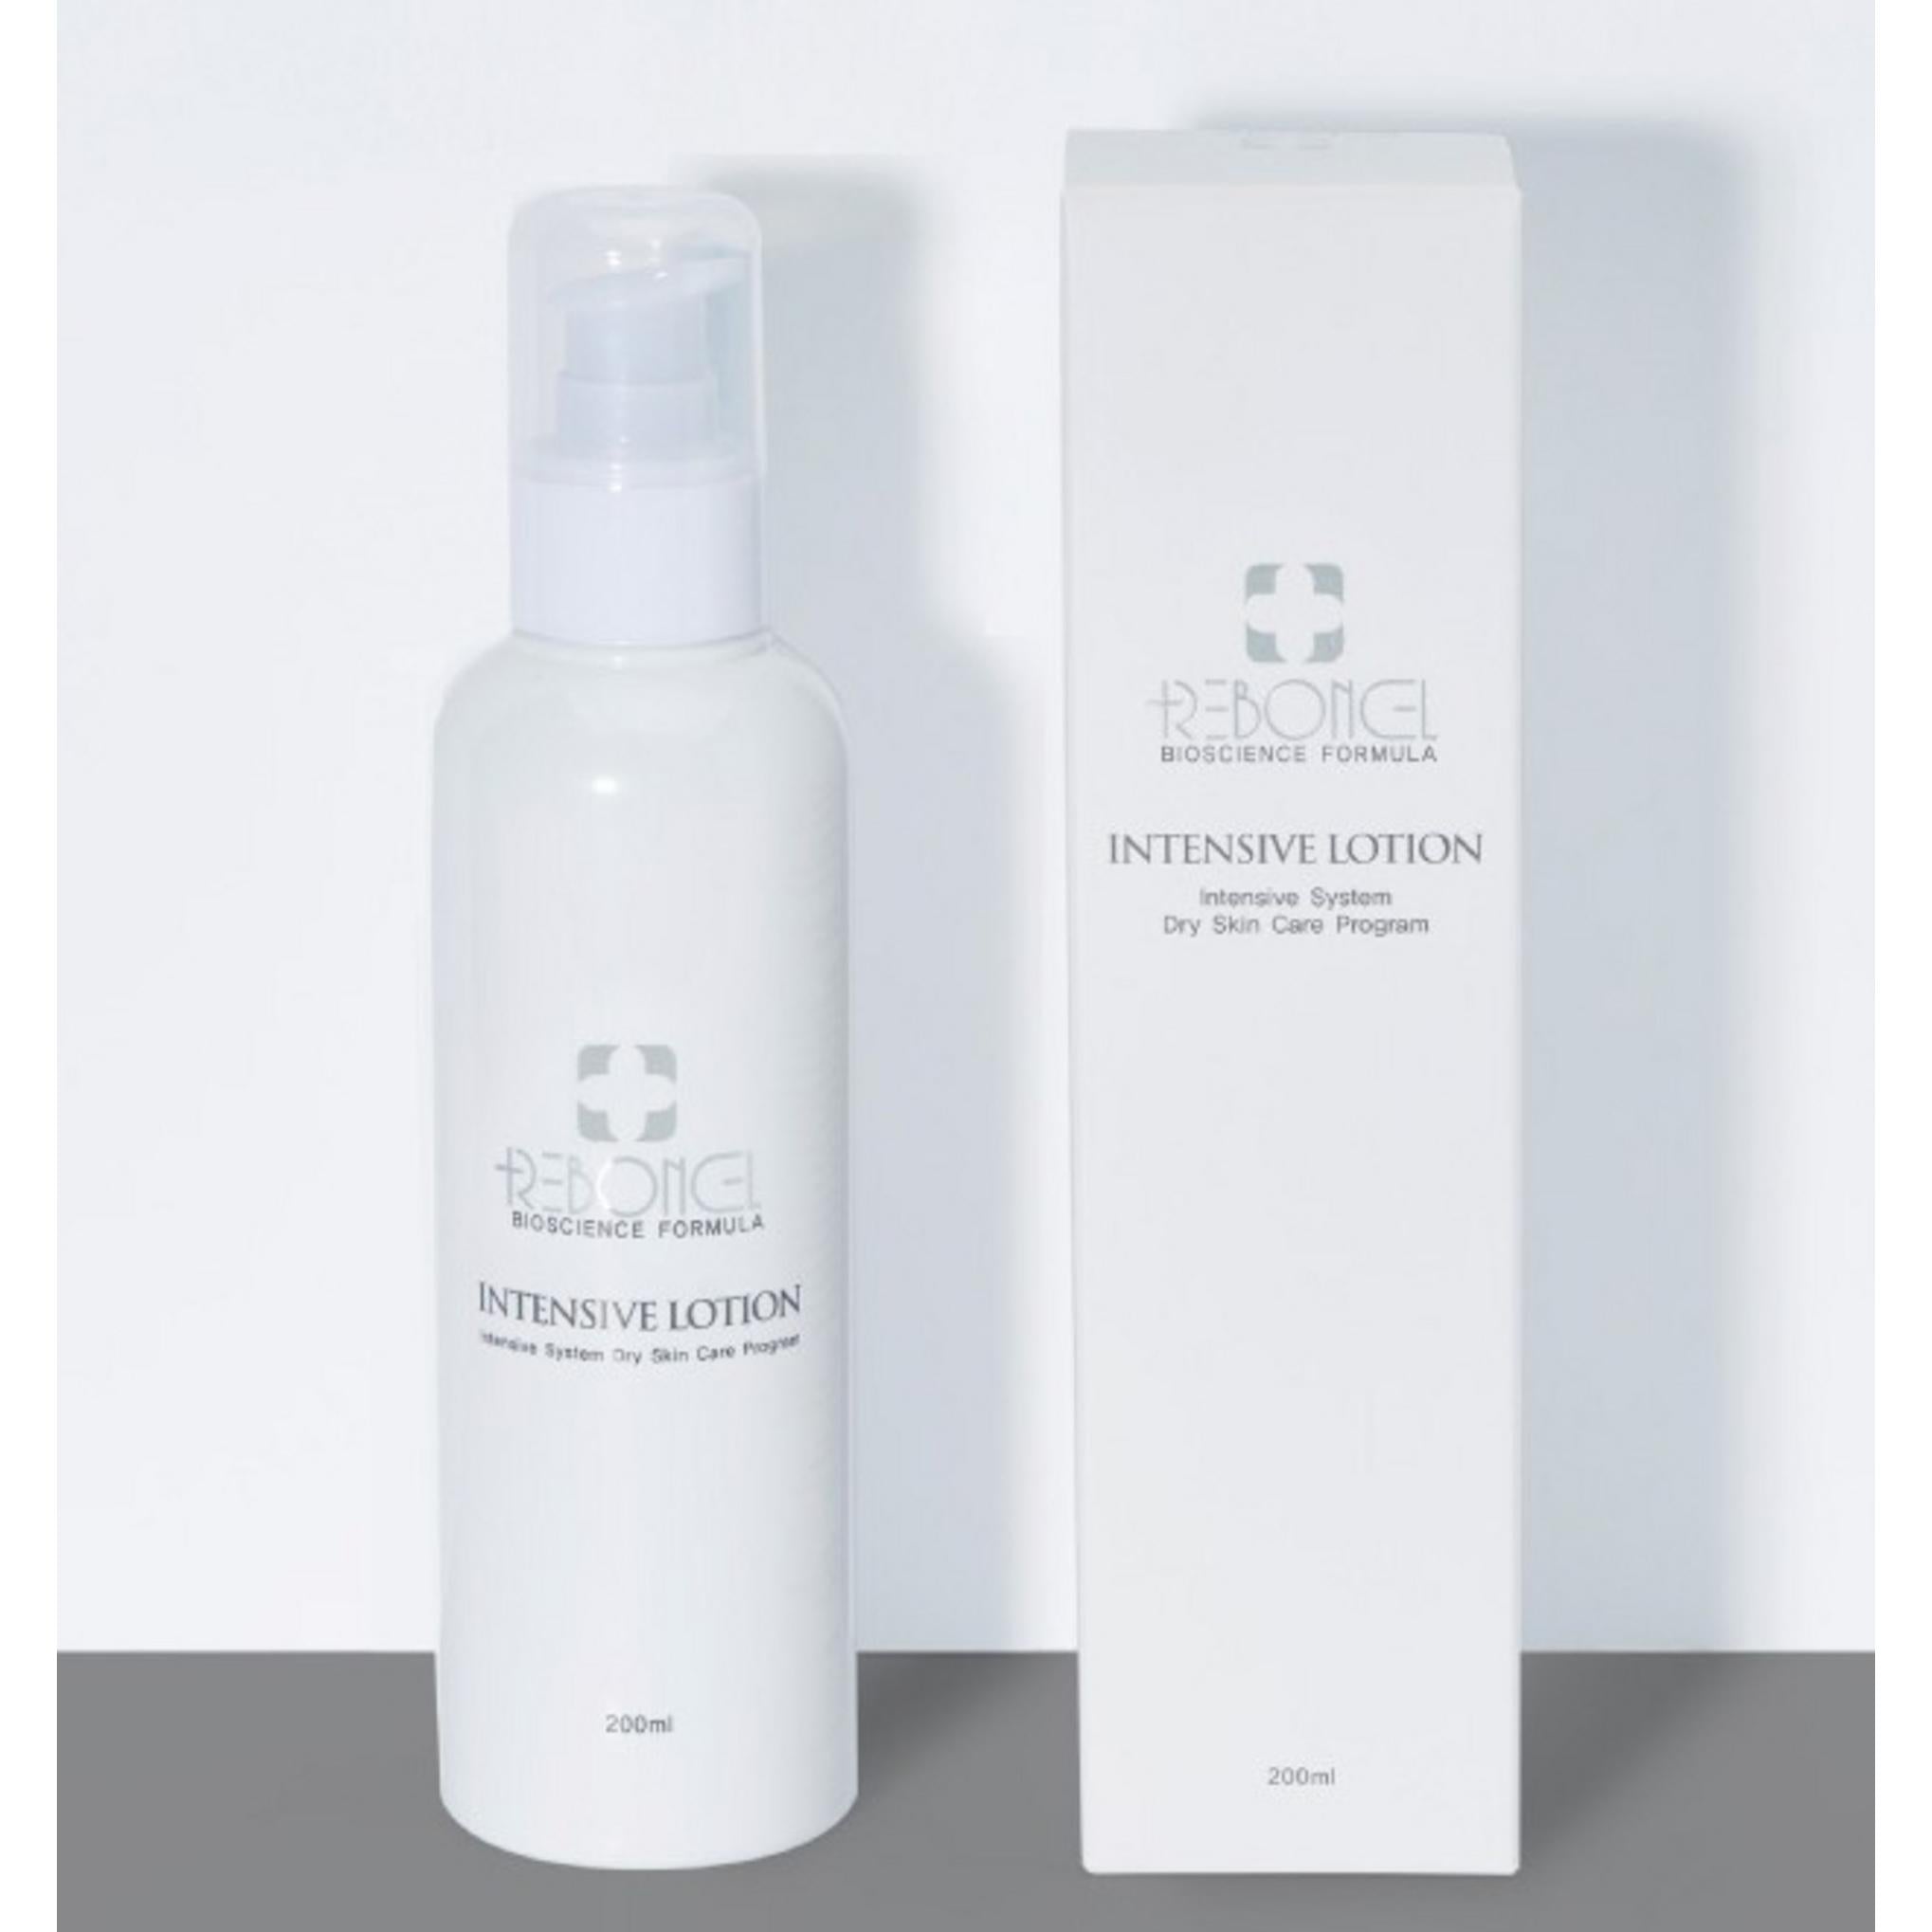 Ribbon Cell Intensive Lotion